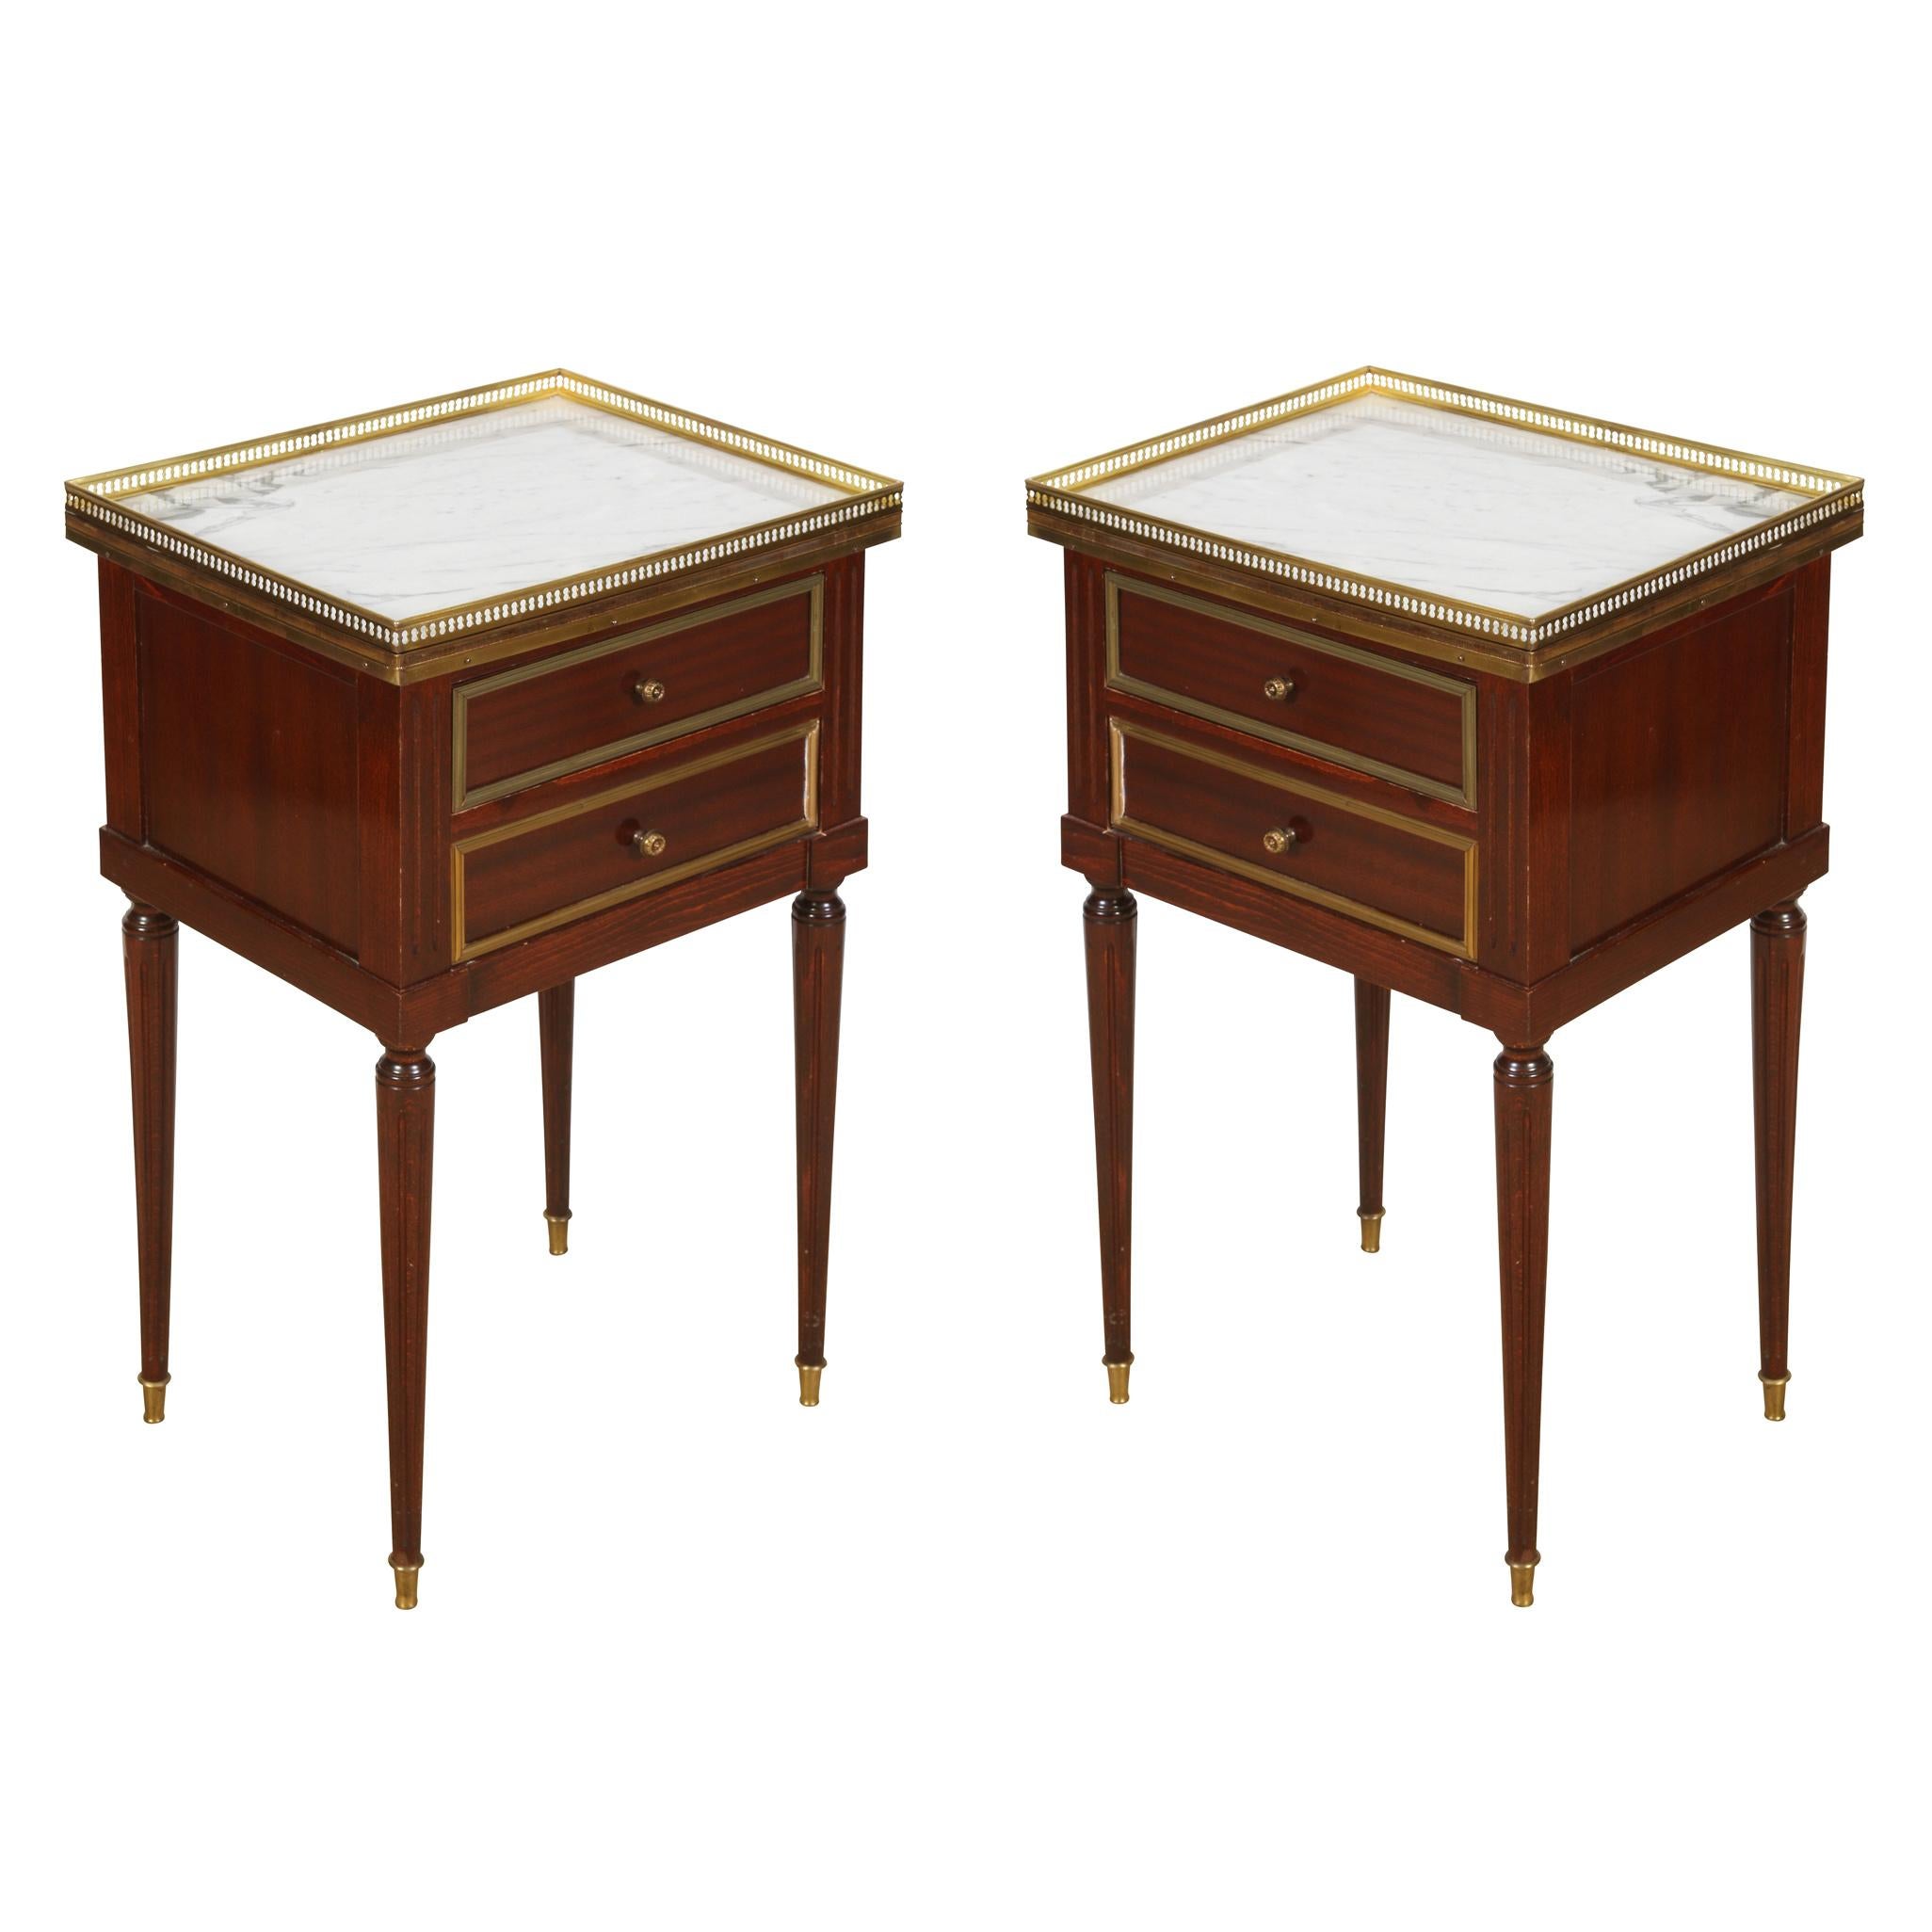 20th Century Pair of Marble Top Night Stands with Brass Gallery Rail